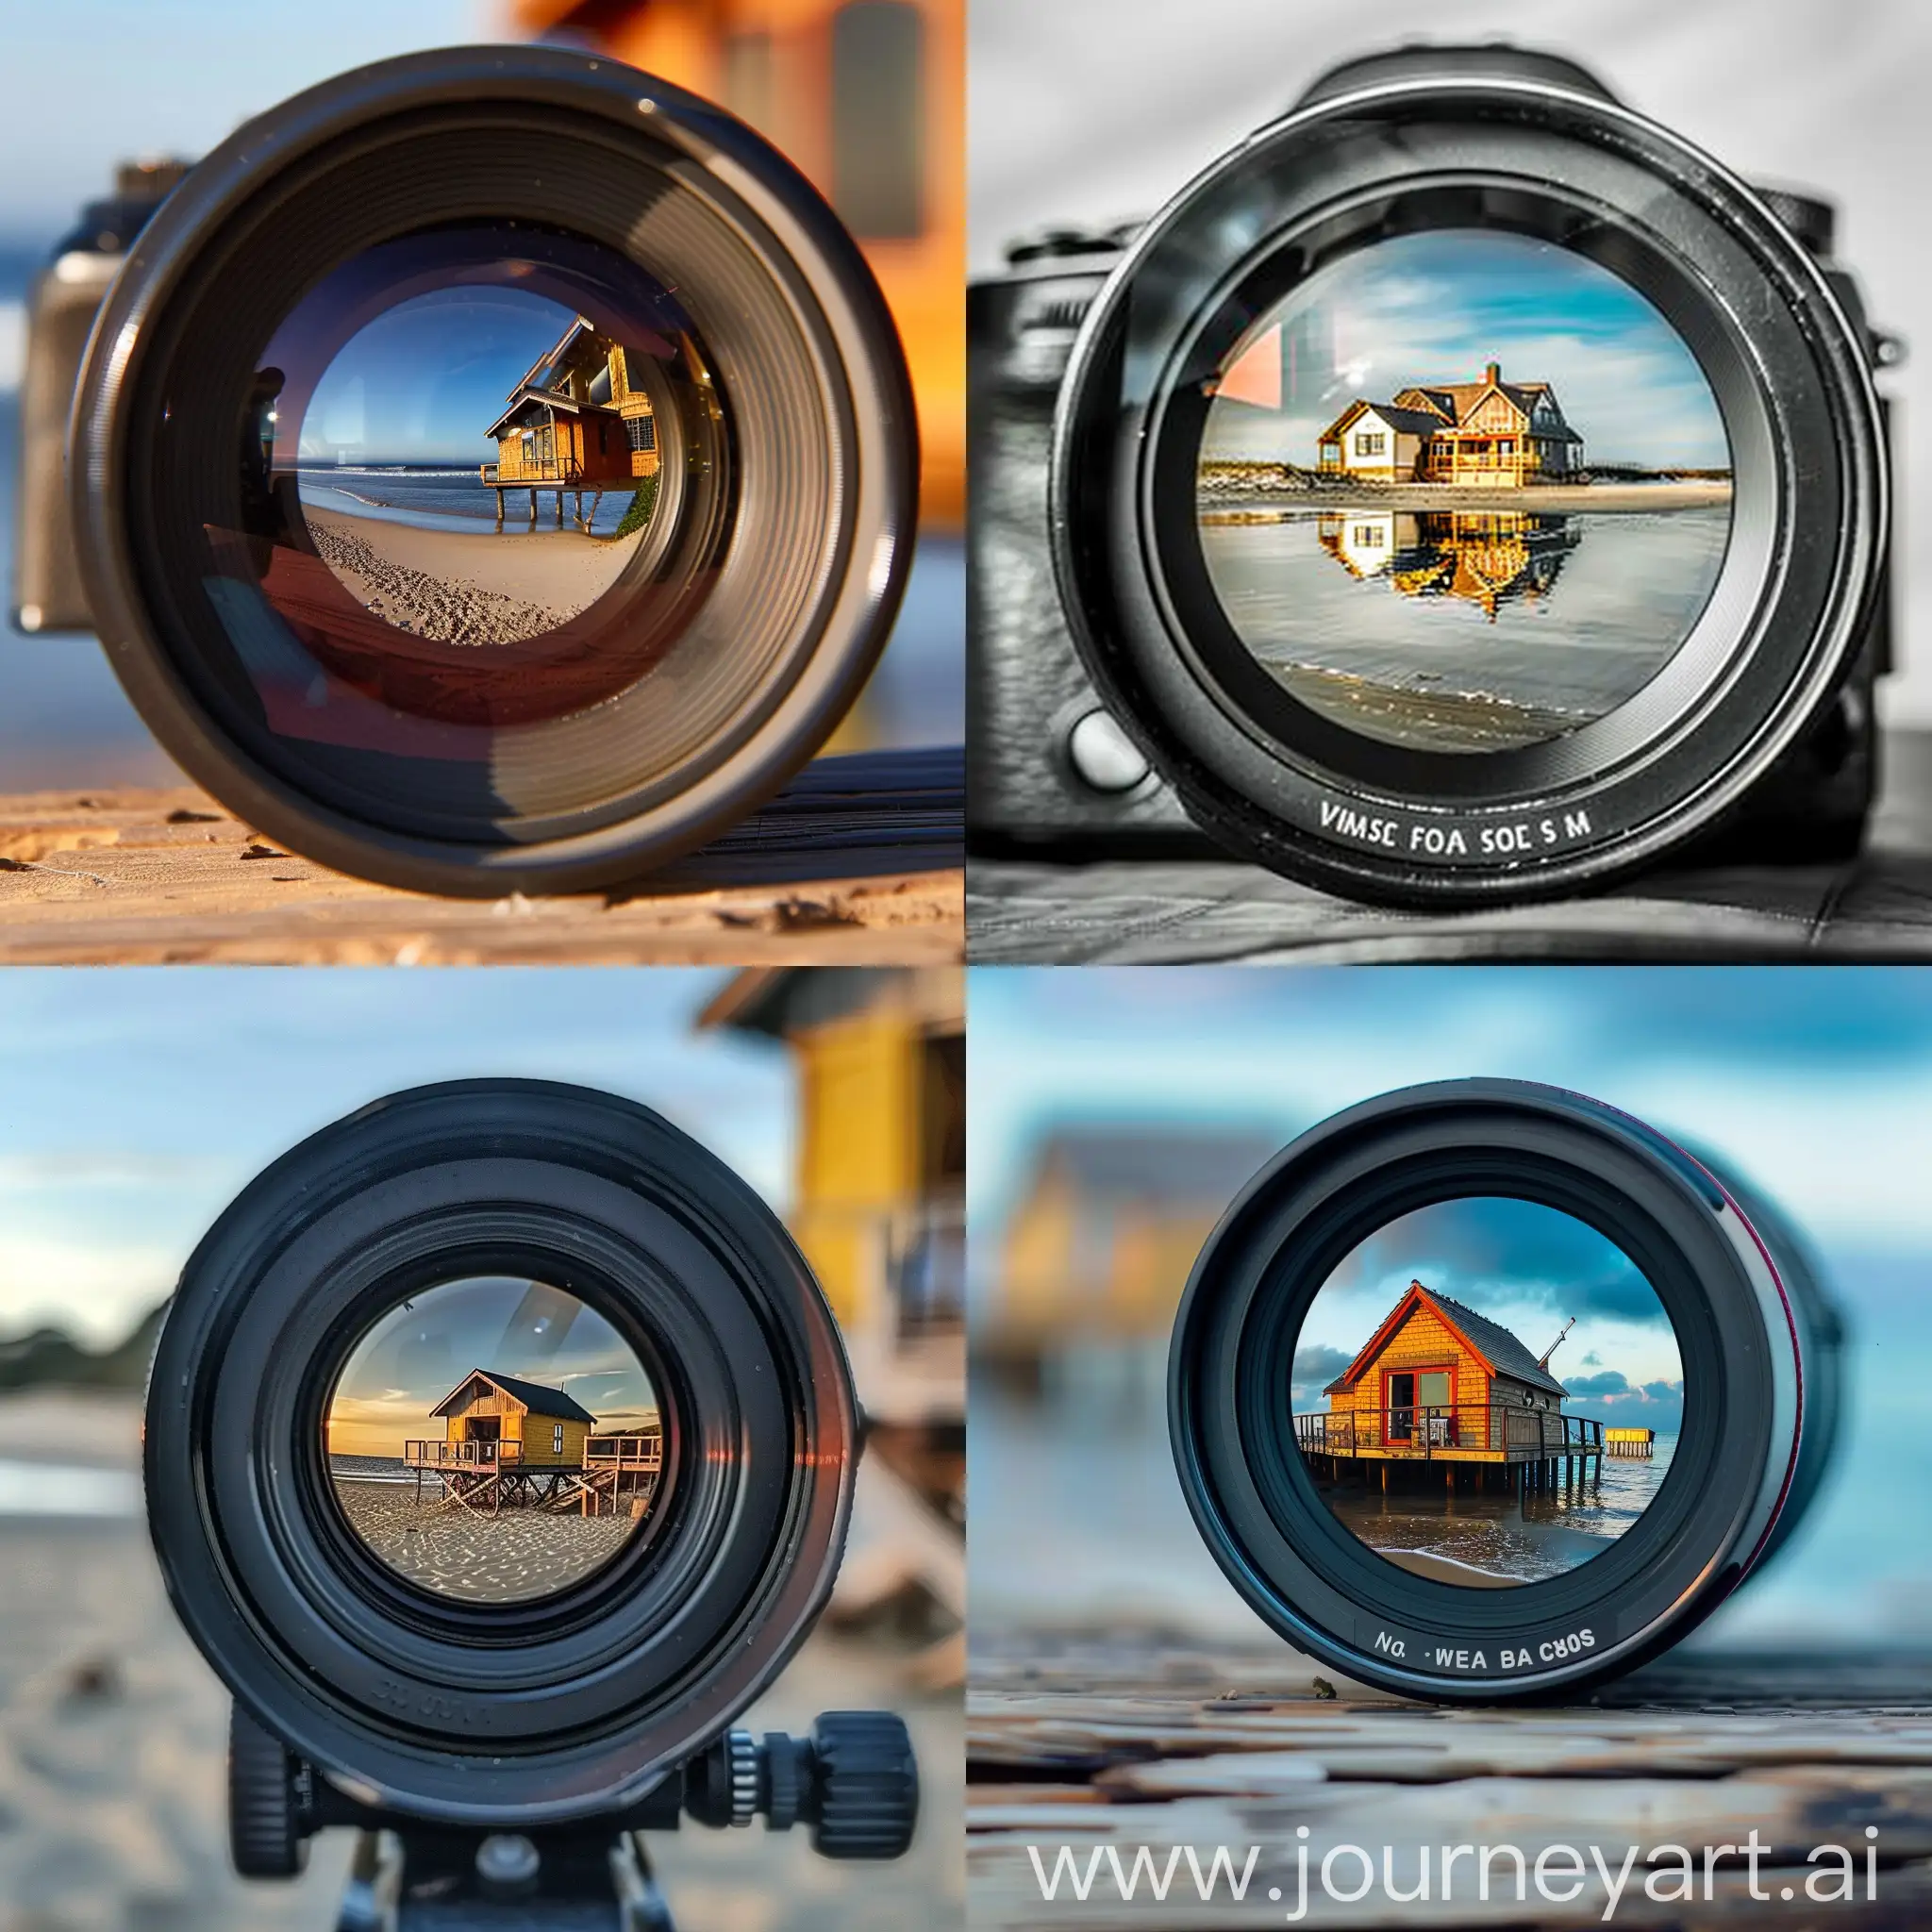 Camera lens with beachhouse in reflection